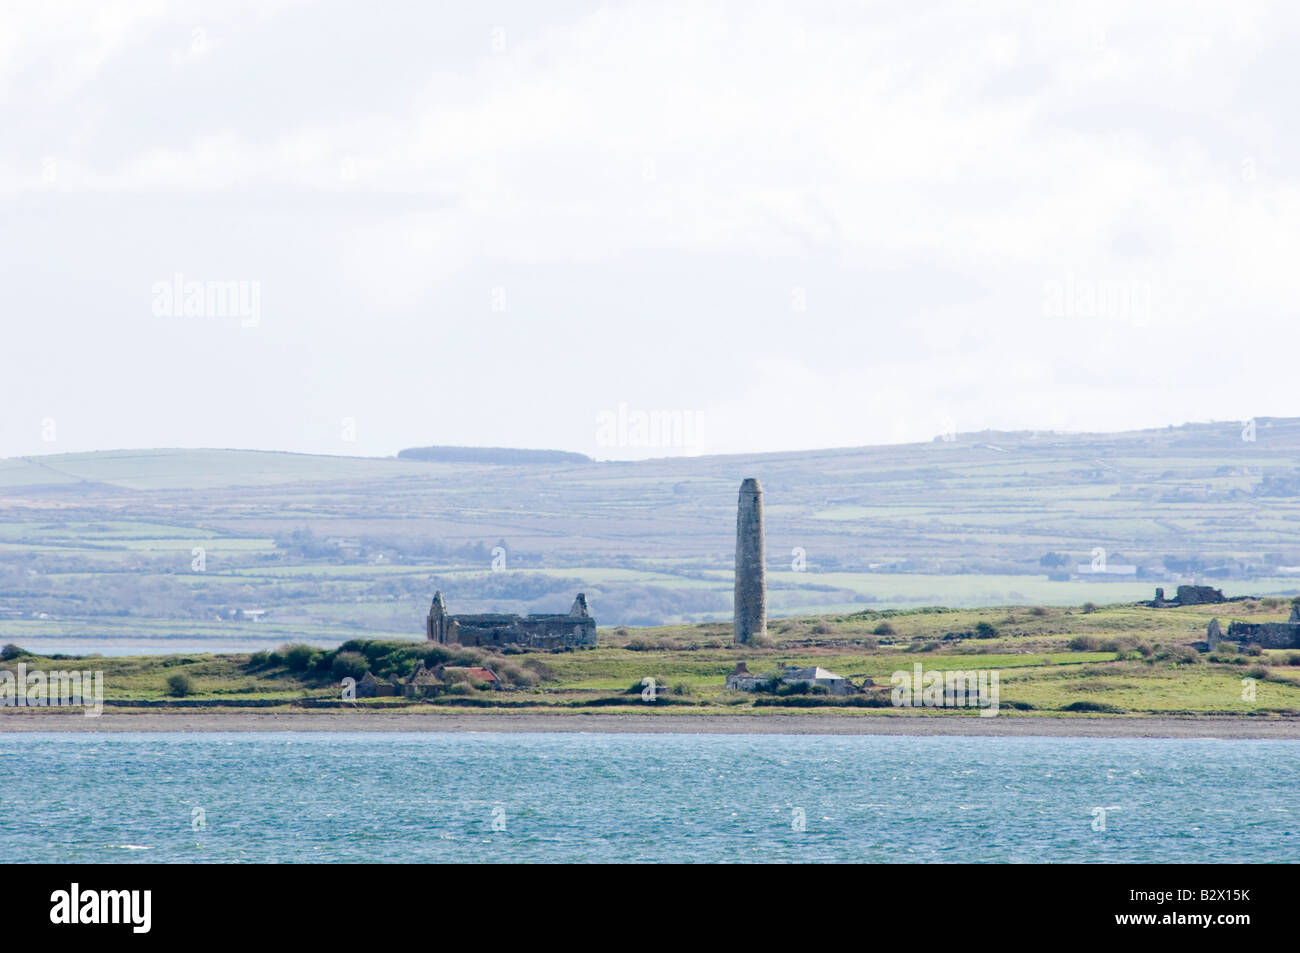 A zoom shot of Scattery Island and its round tower, in the Shannon Estuary in County Clare Ireland Stock Photo